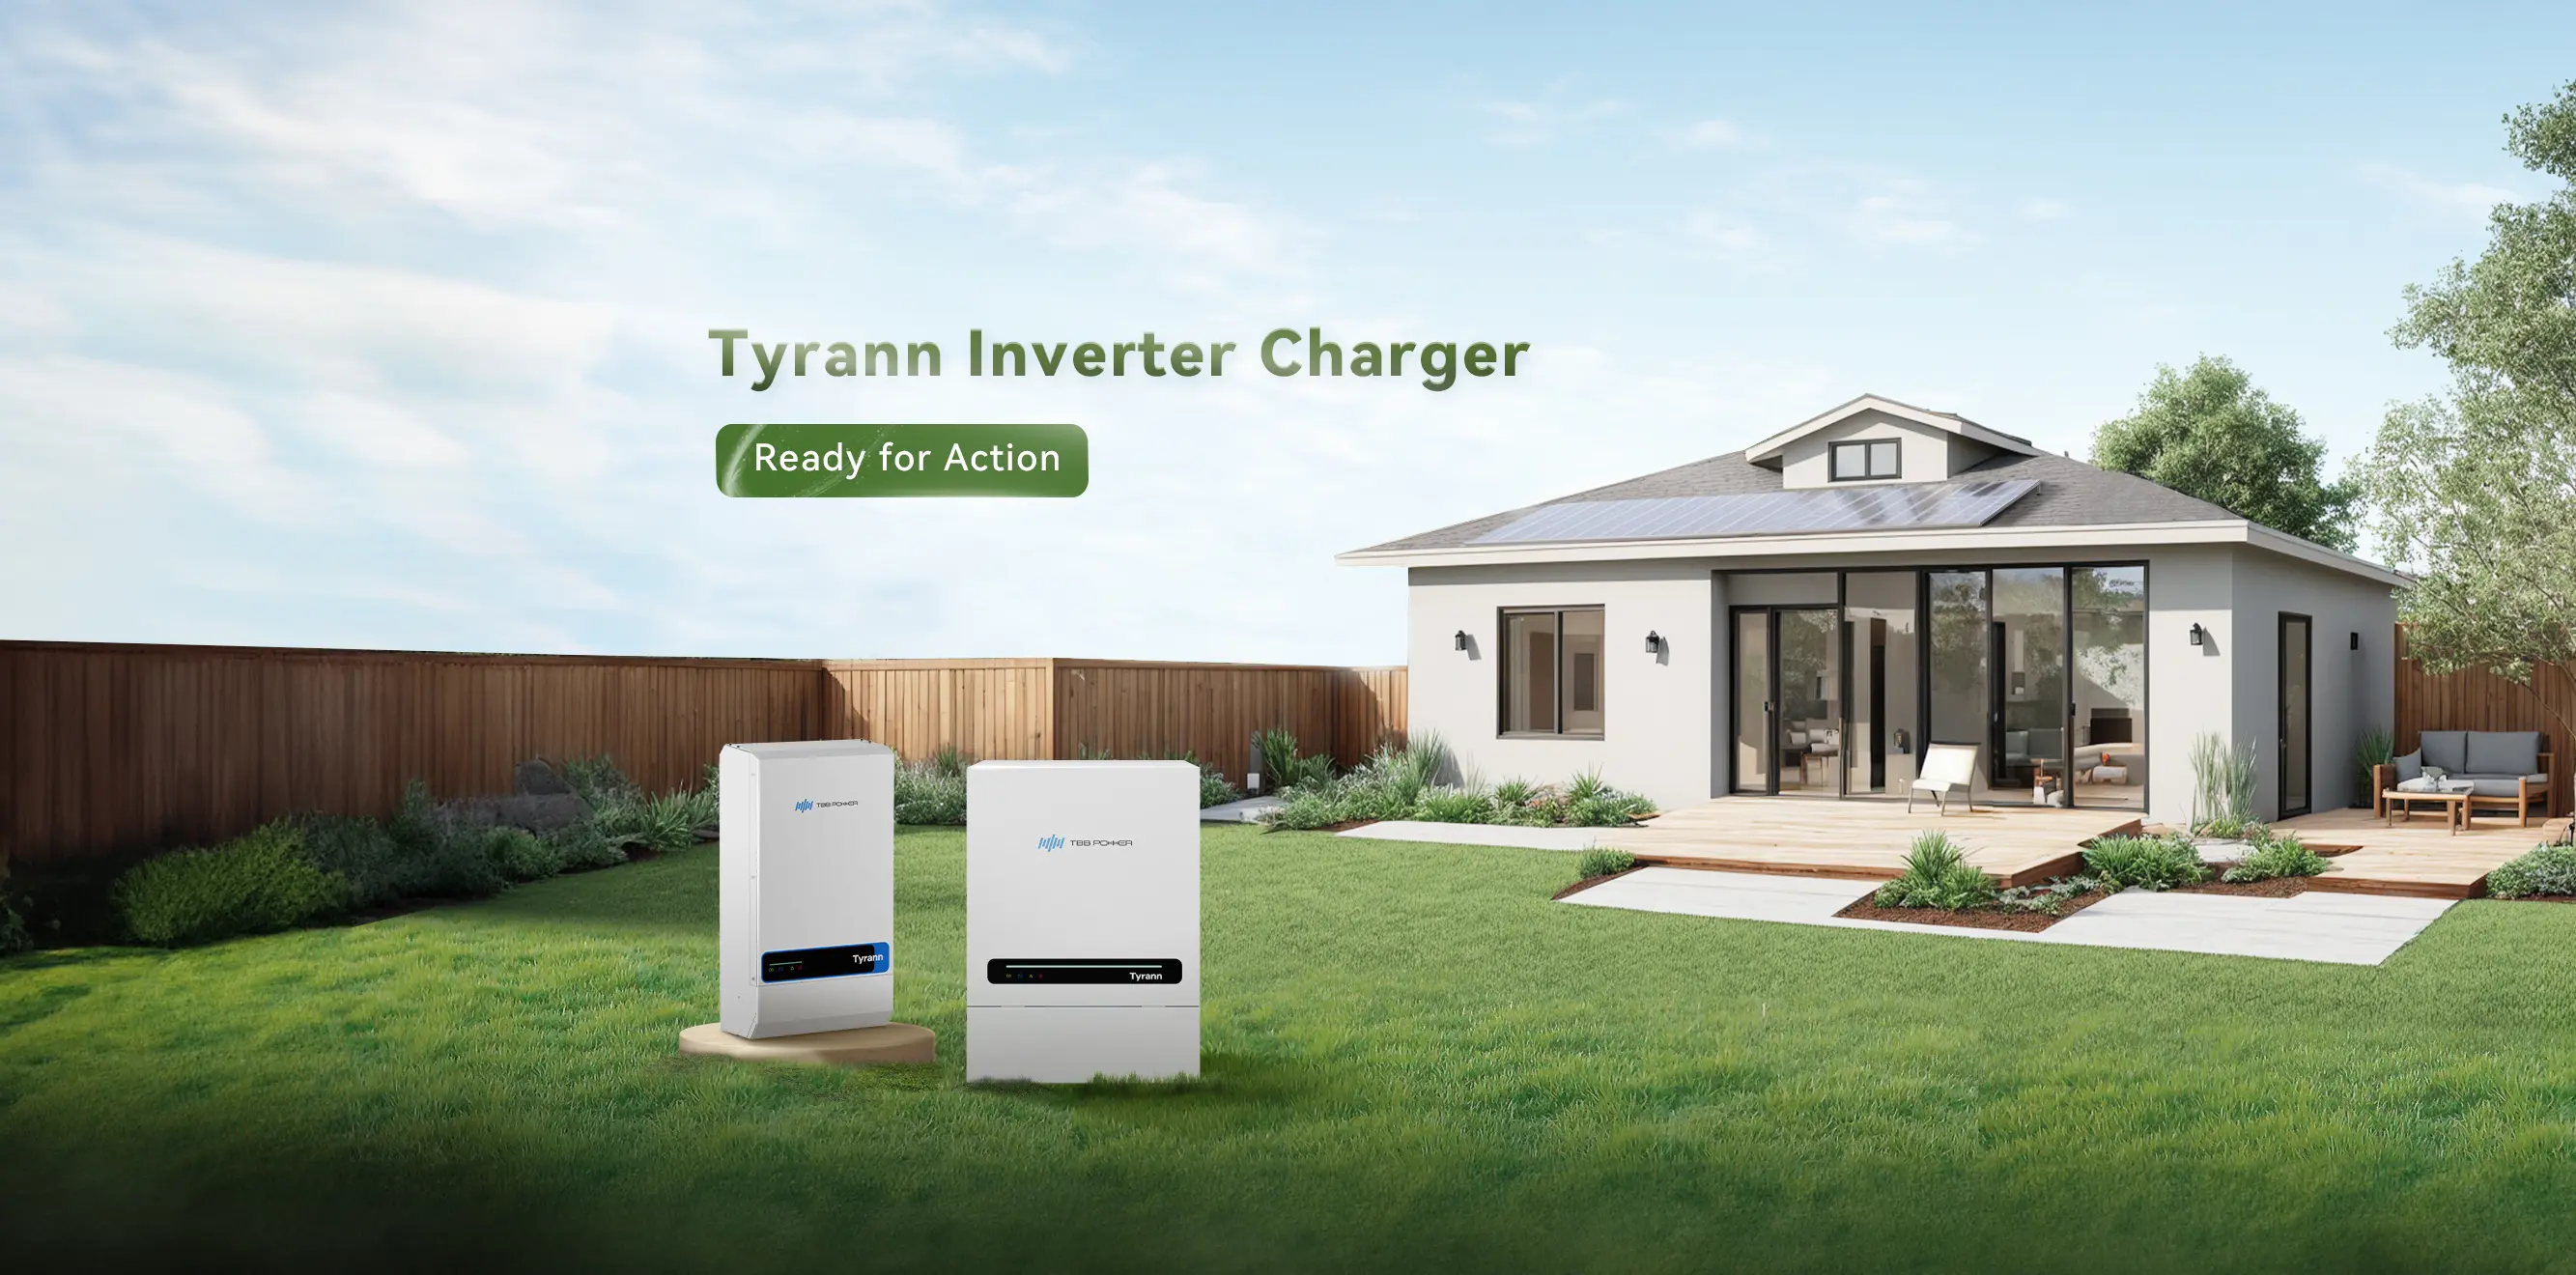 tyrann inverter charger ready for launch